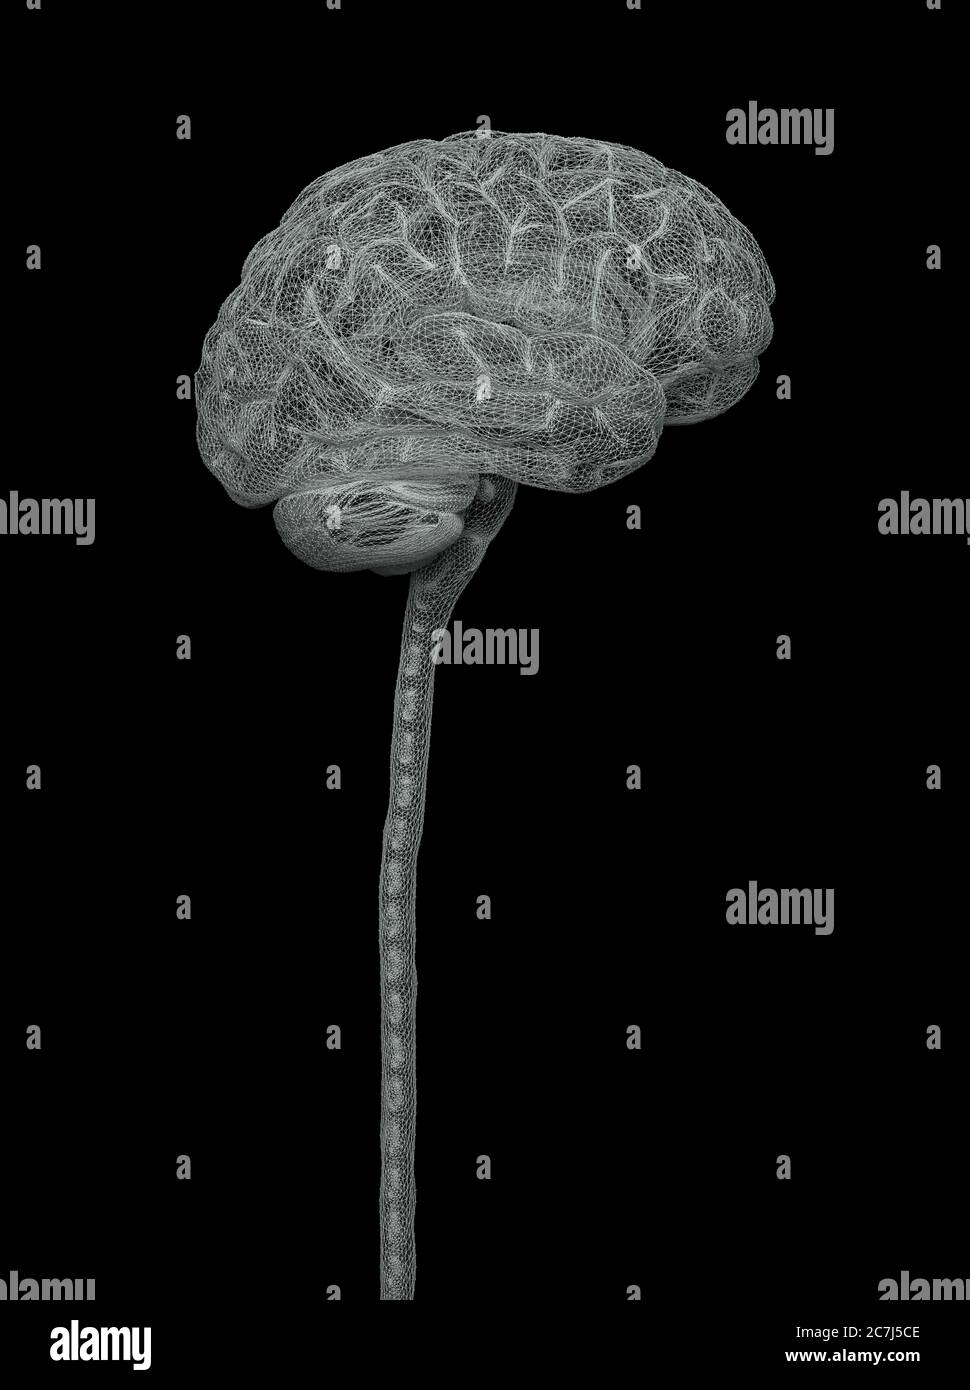 Human brain and spinal cord, illustration. Stock Photo